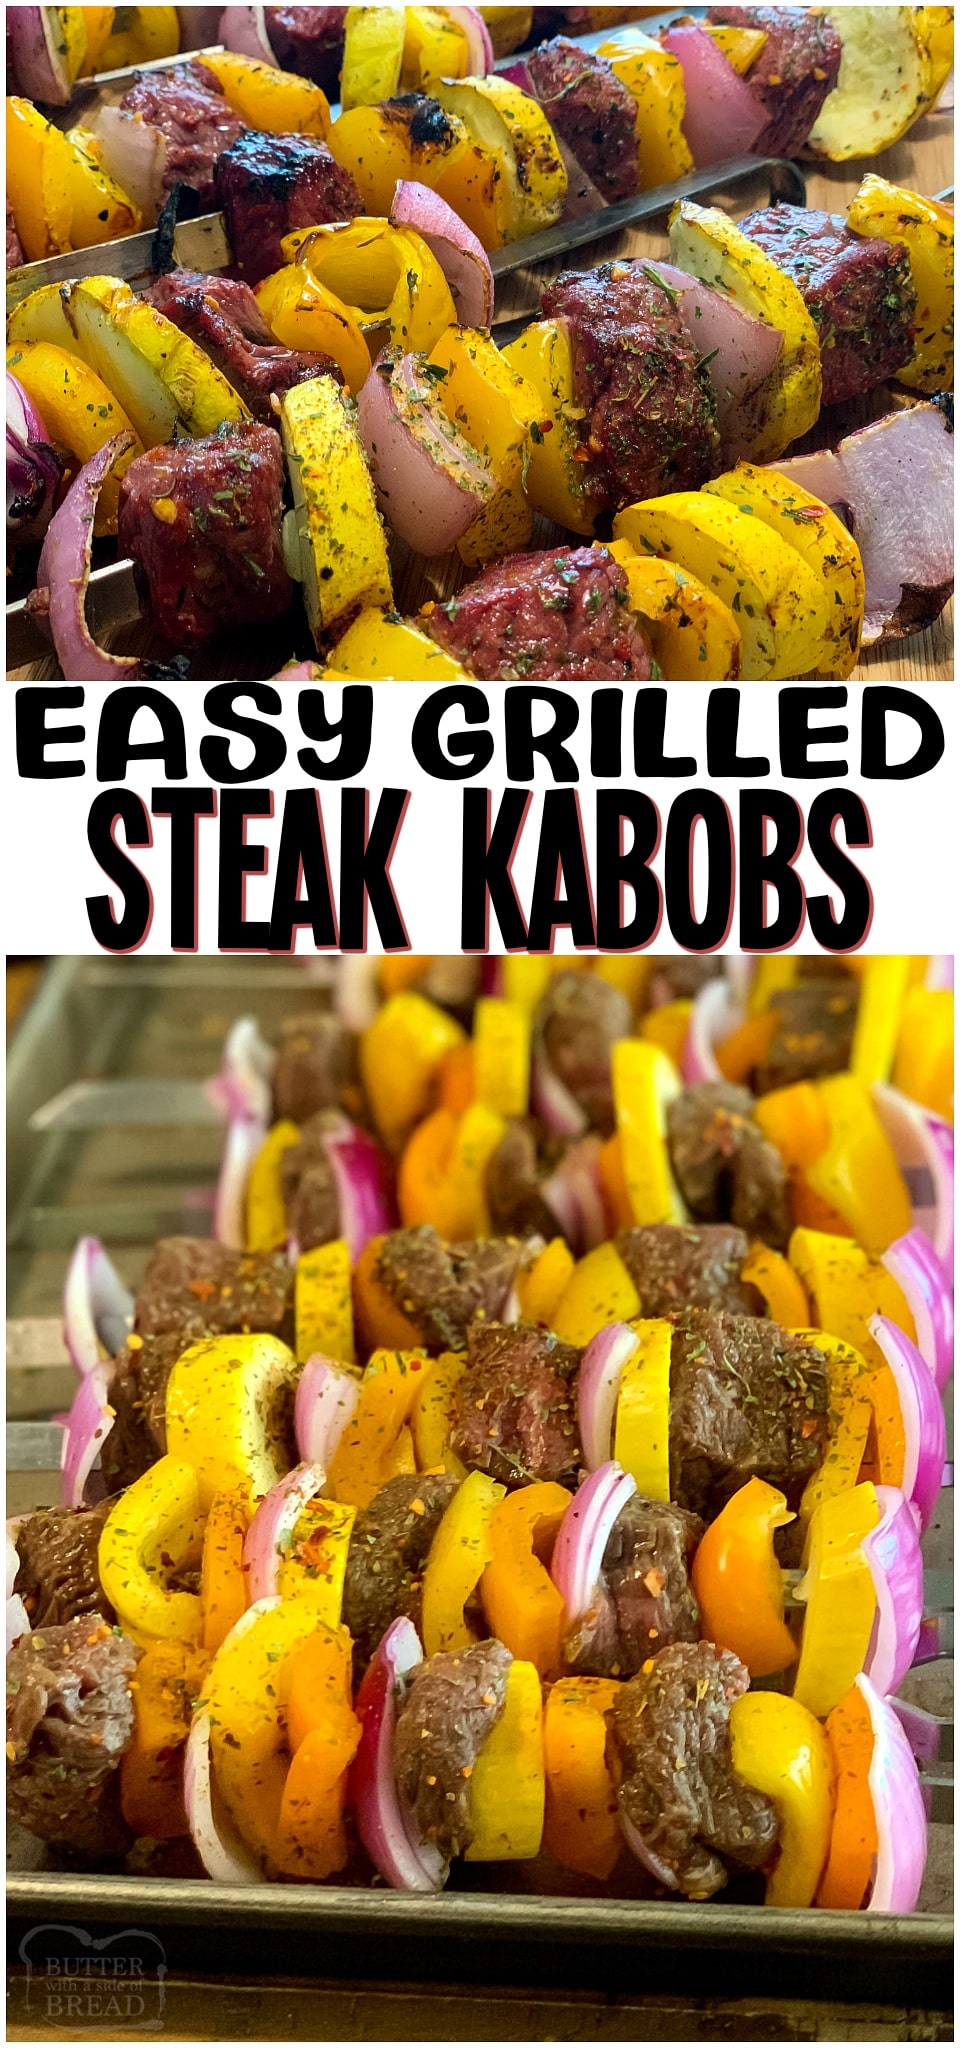 Marinated Grilled Steak Kabobs made with tender steak and fresh vegetables, glazed with a flavorful marinade. Easy Grilled Steak recipe perfect for cookouts any time of the year!